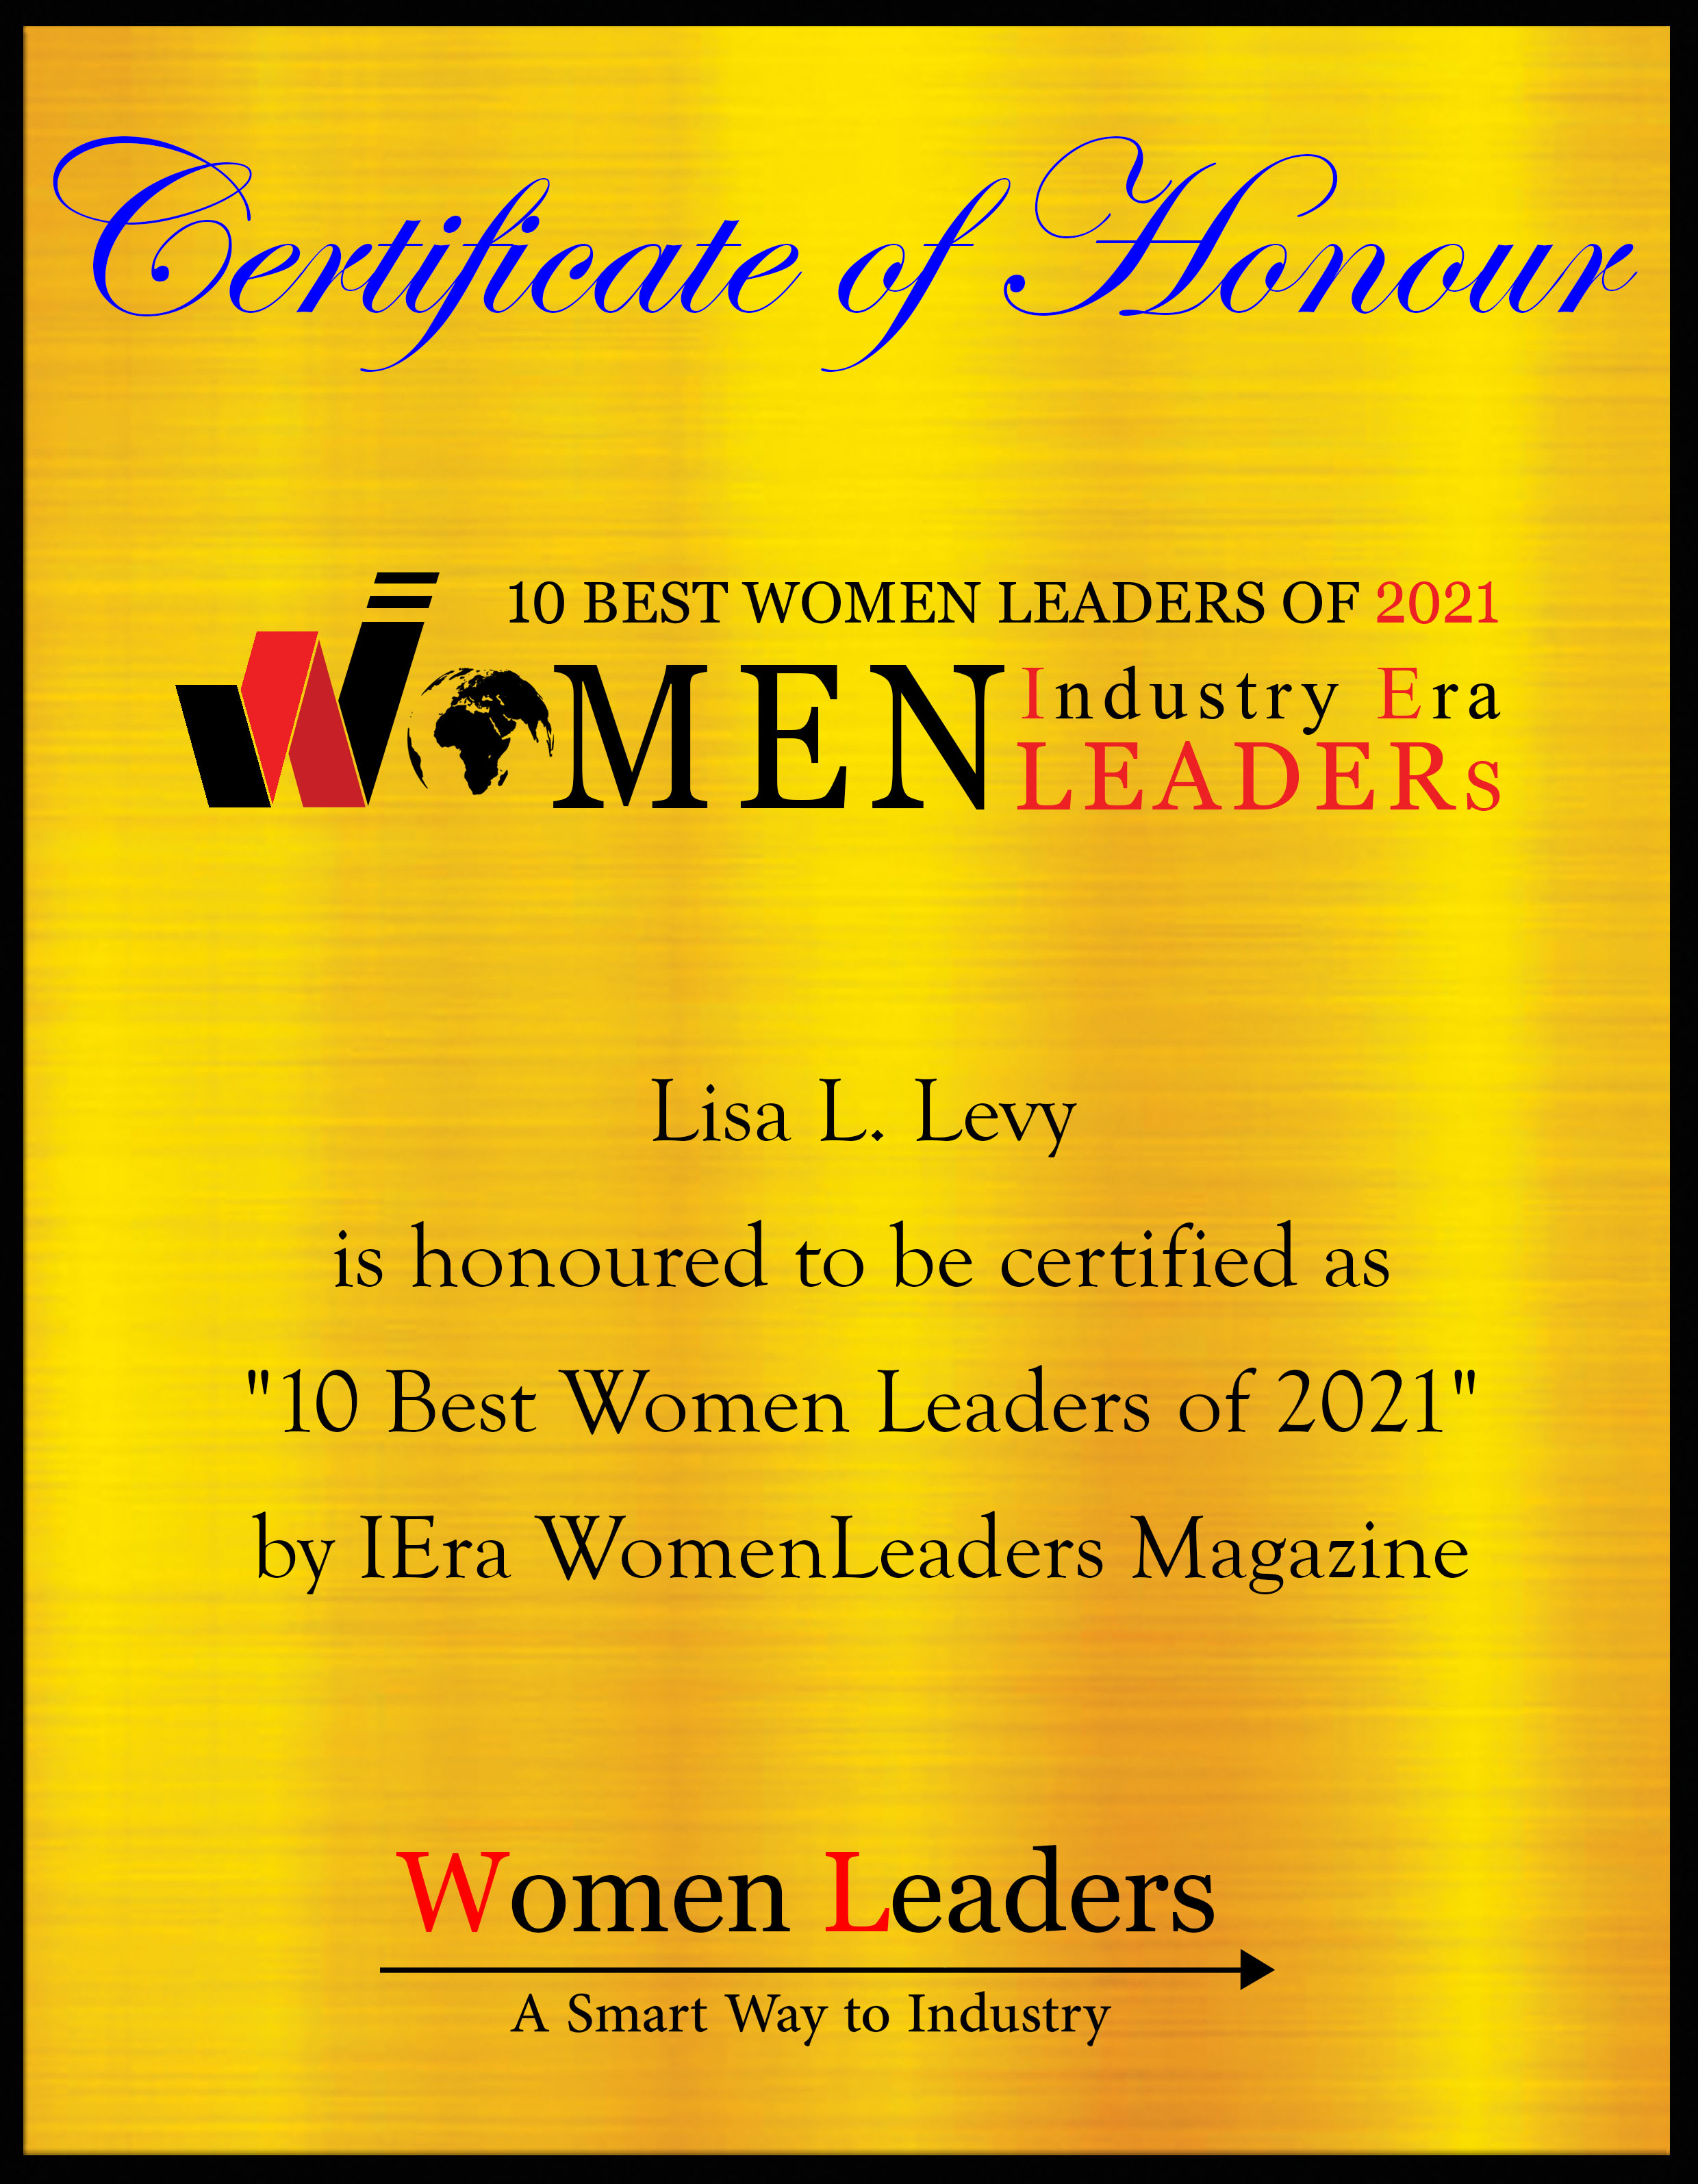 Lisa L. Levy, Founder & CEO at Lcubed Consulting, Best WomenLeaders of 2021